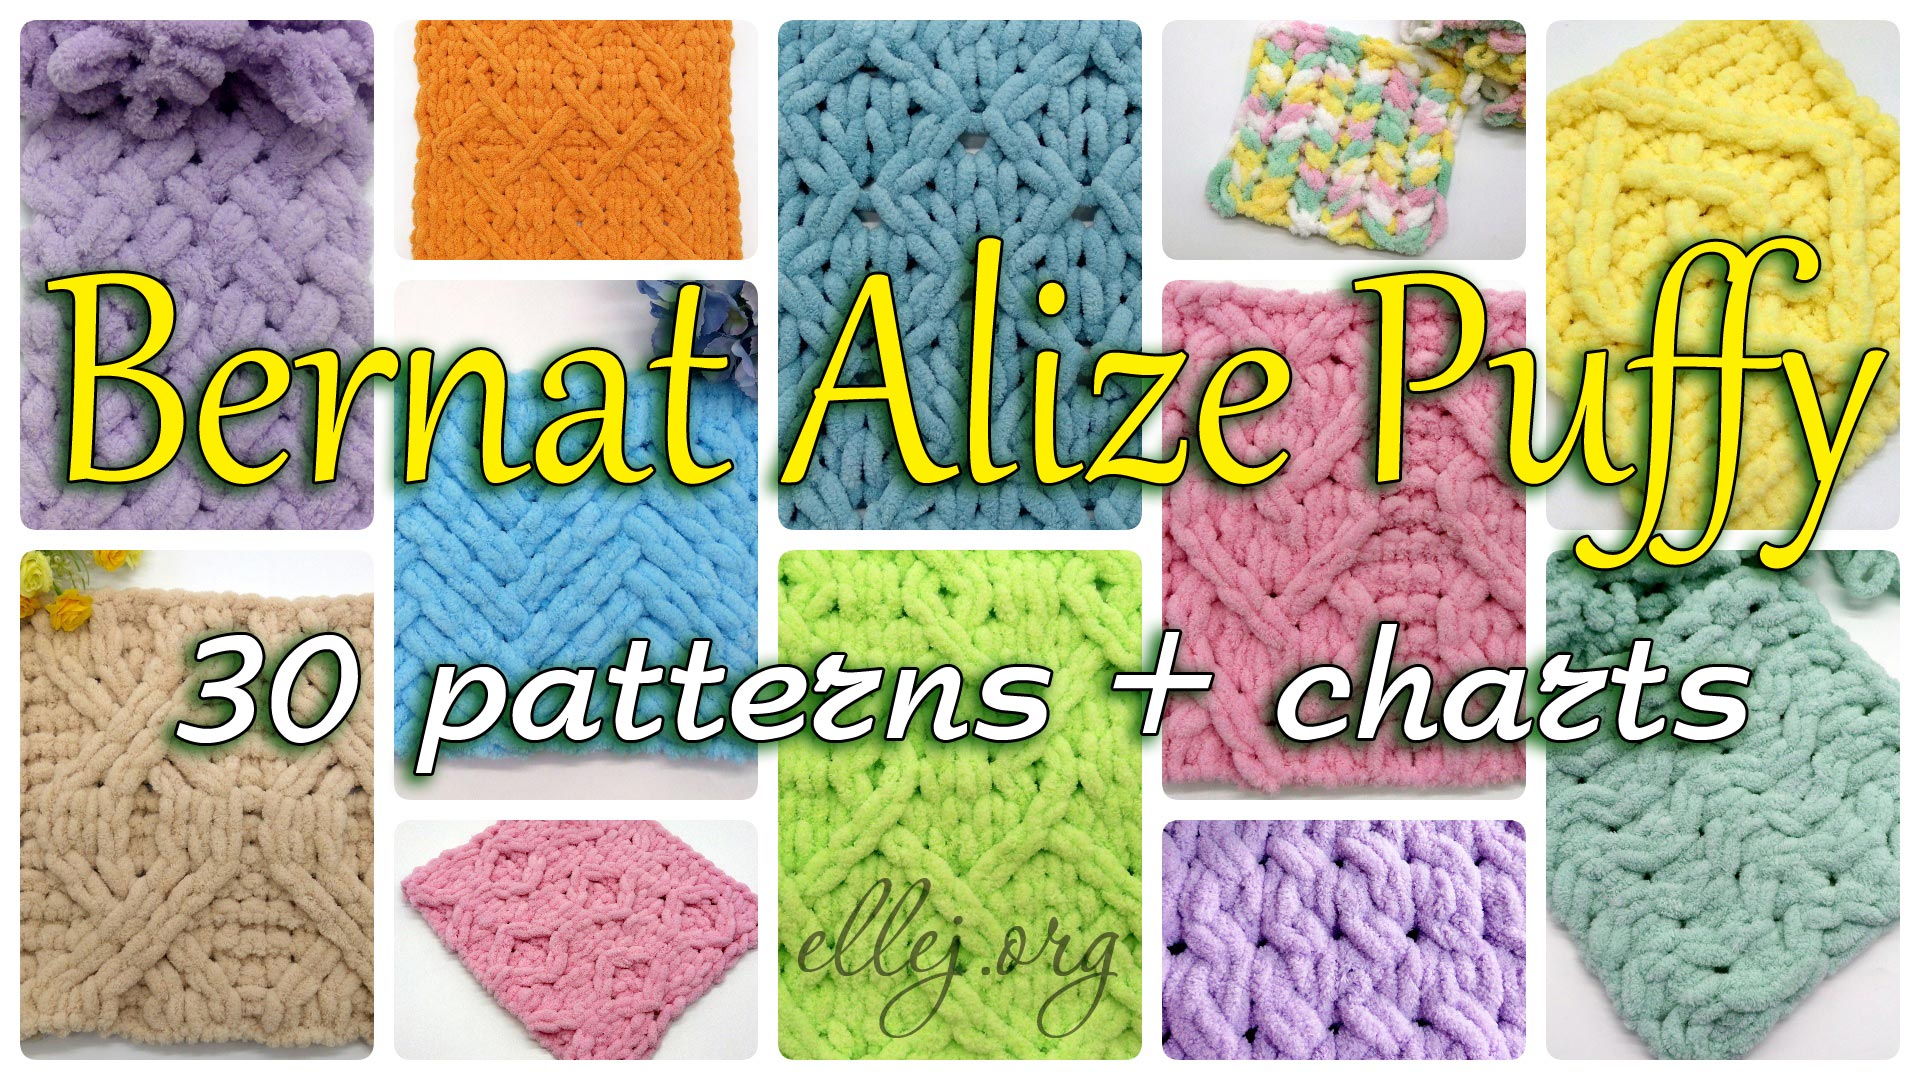 30 patterns for Bernat Alize Puffy. Diagrams for creating blankets